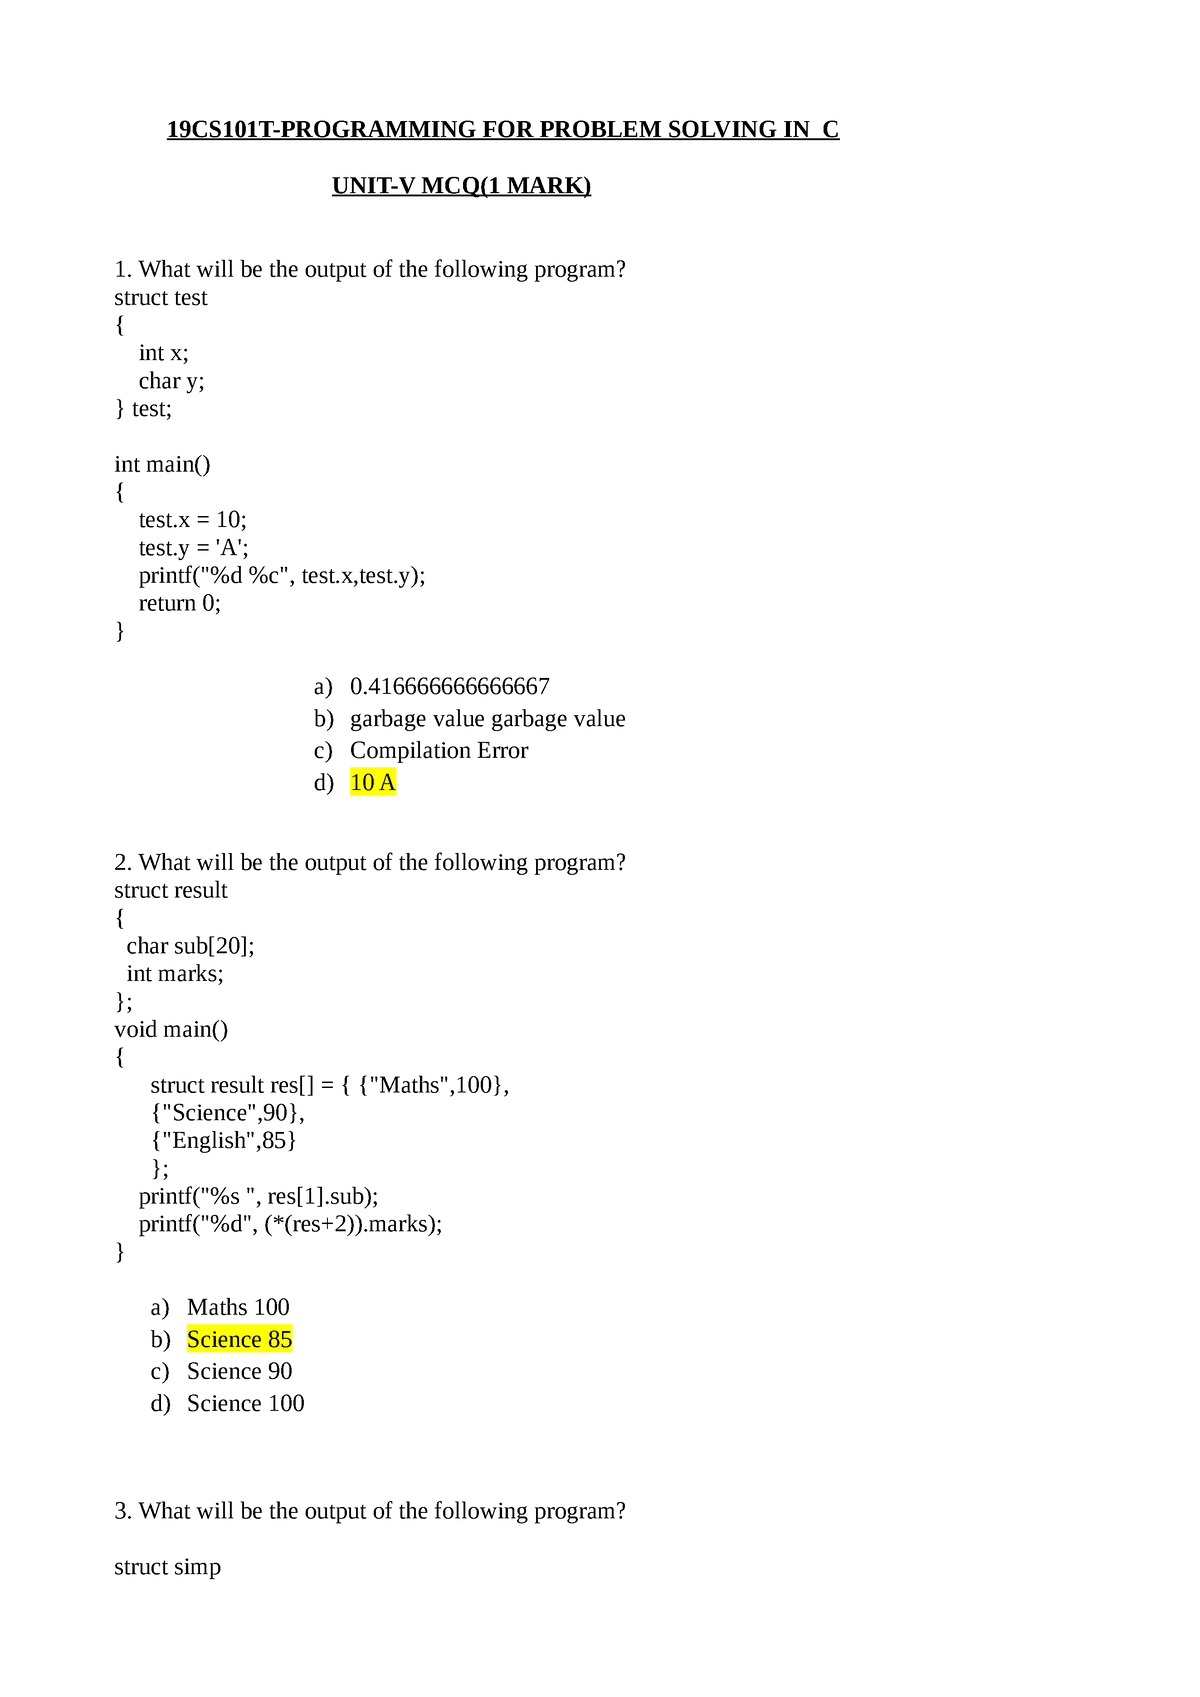 mcq on problem solving in c